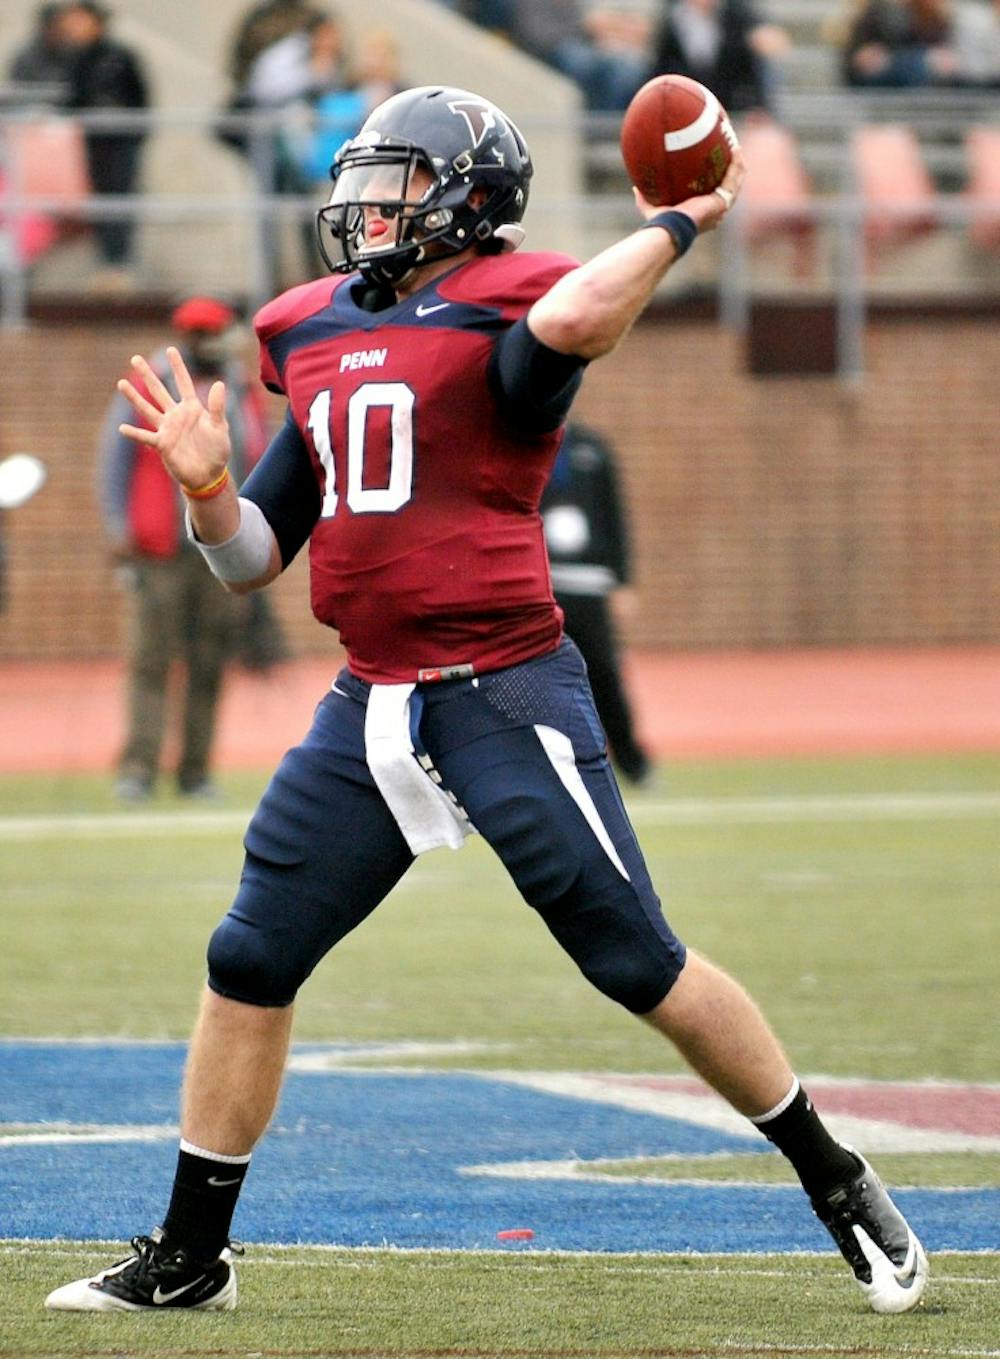 	After suffering an ankle injury in last year’s home finale against Harvard,  senior quarterback Billy Ragone is ready to take the reins once again as Penn’s field general. After a slow start to last season, Ragone was an essential part of Penn’s close Ivy victories, orchestrating multiple game-winning drives.